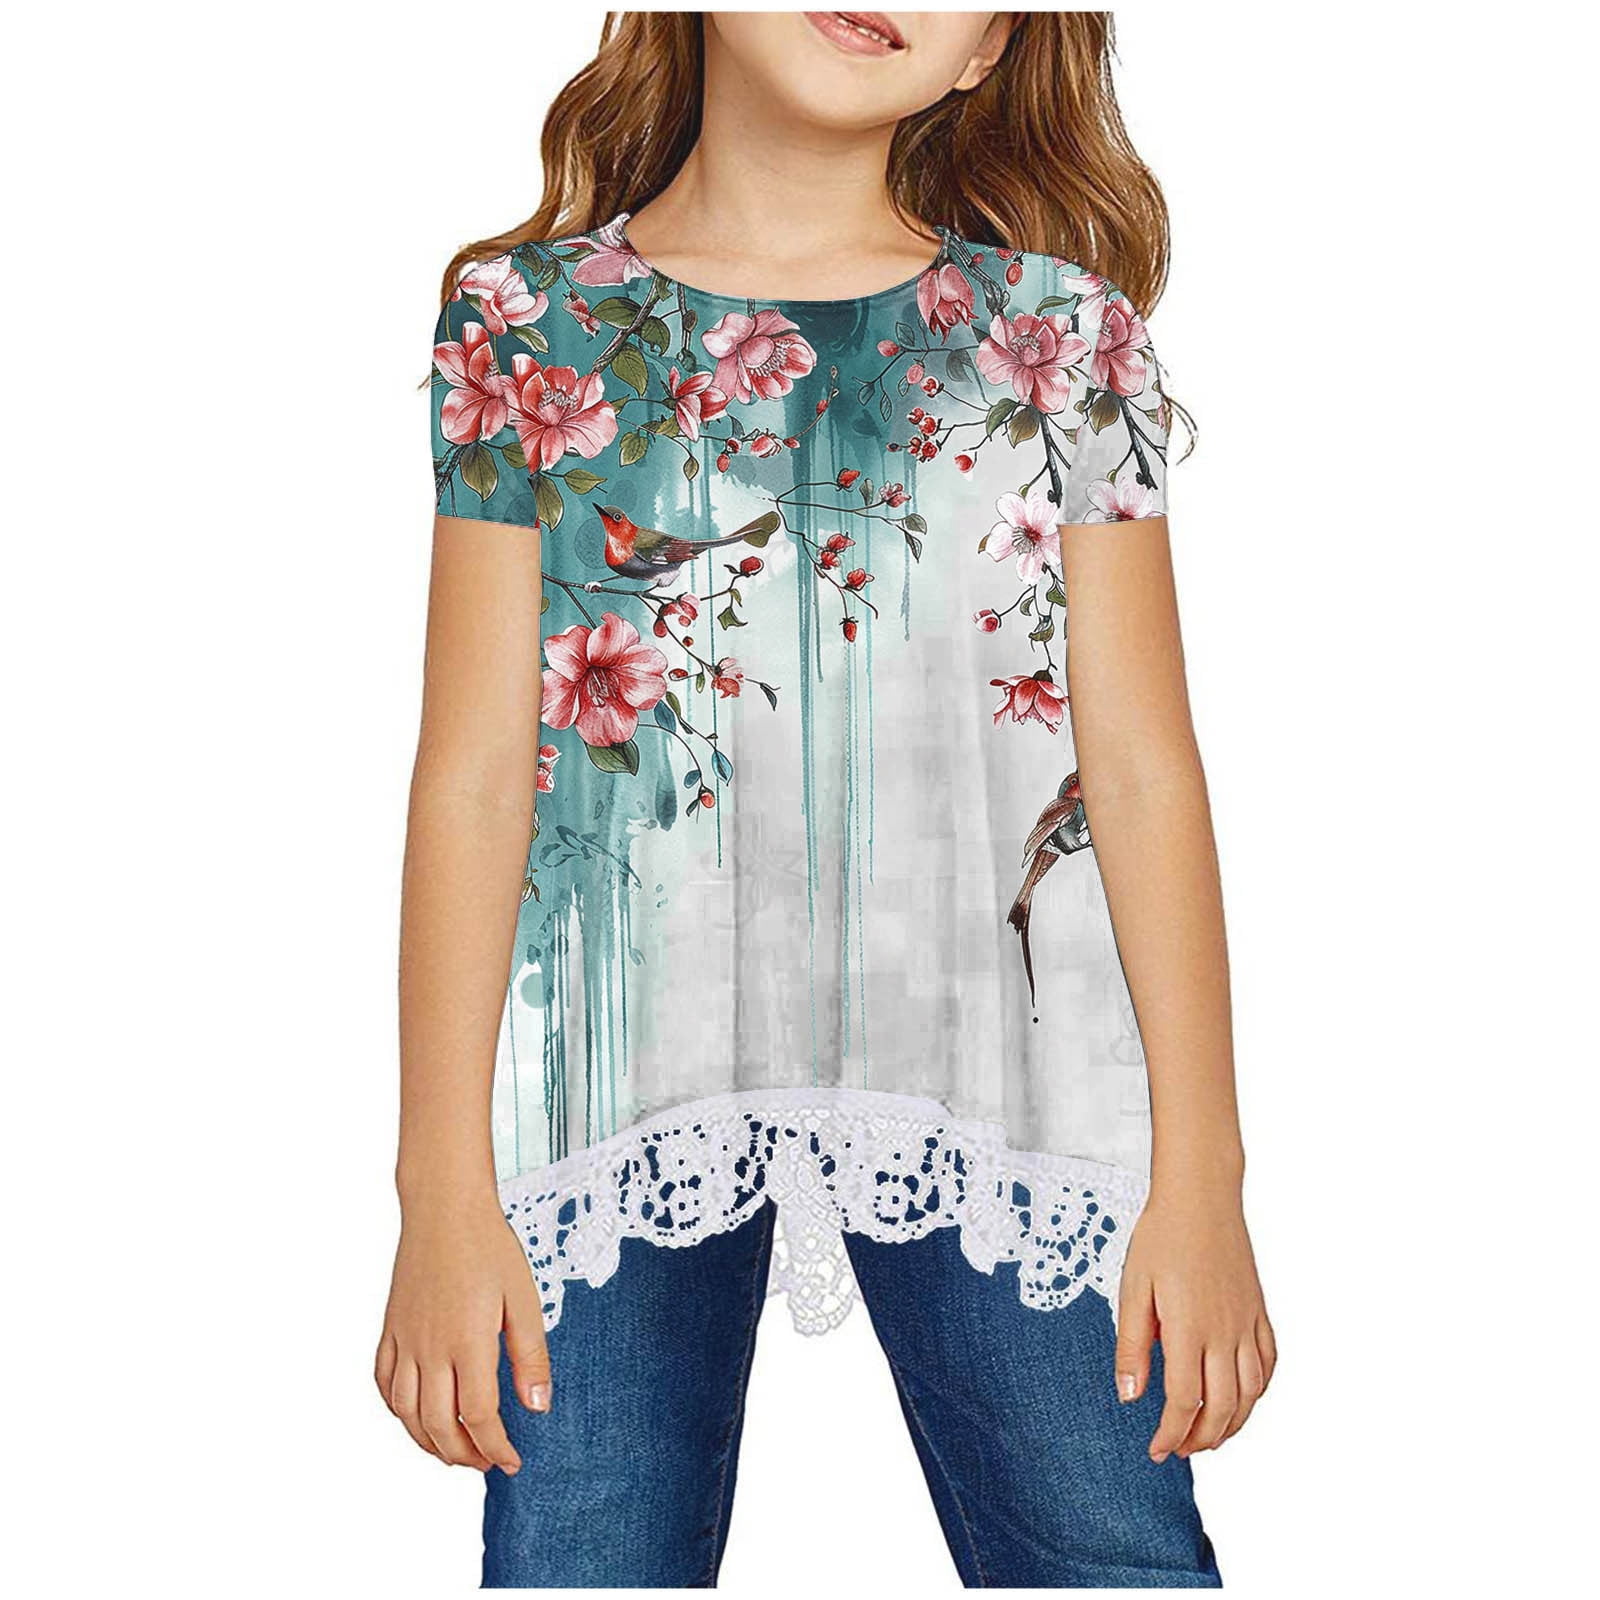 Sakmal Kids Clothes Clearance Girls Short Sleeve 7-8y Floral Crew Neck ...